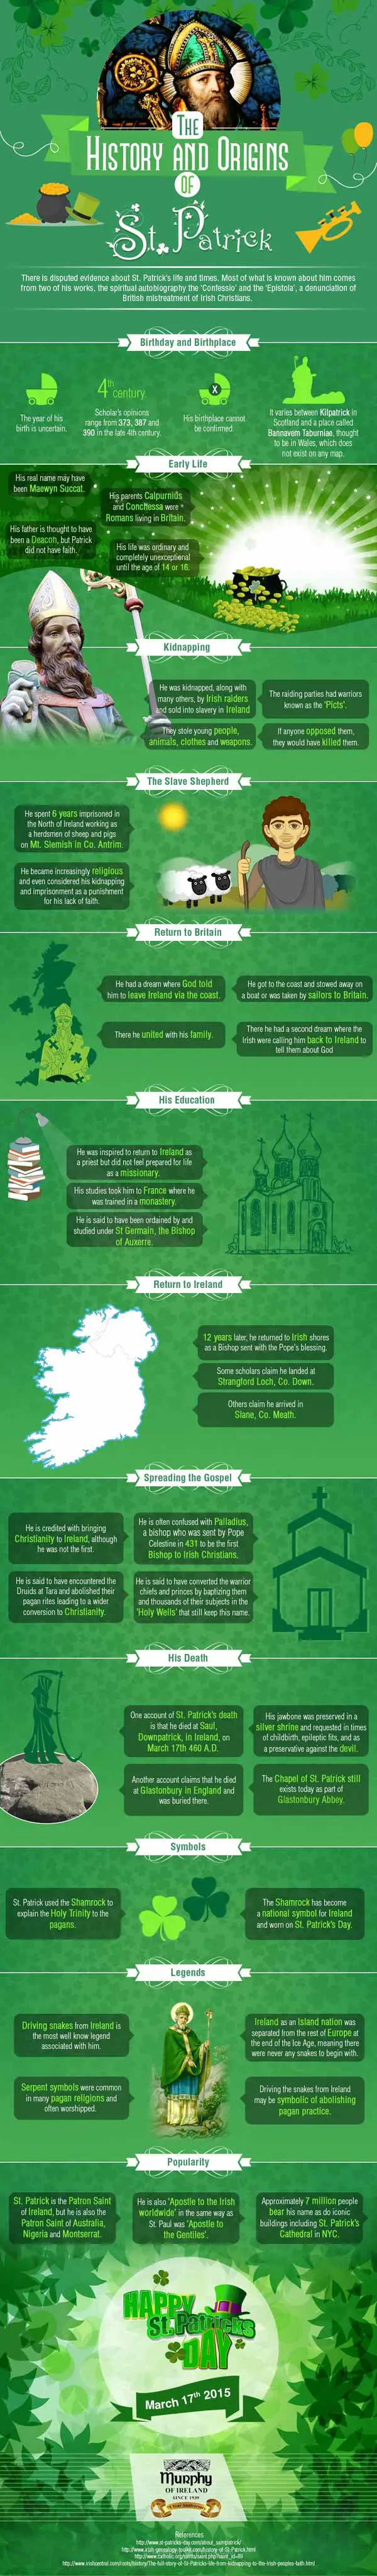 The life of St Patrick